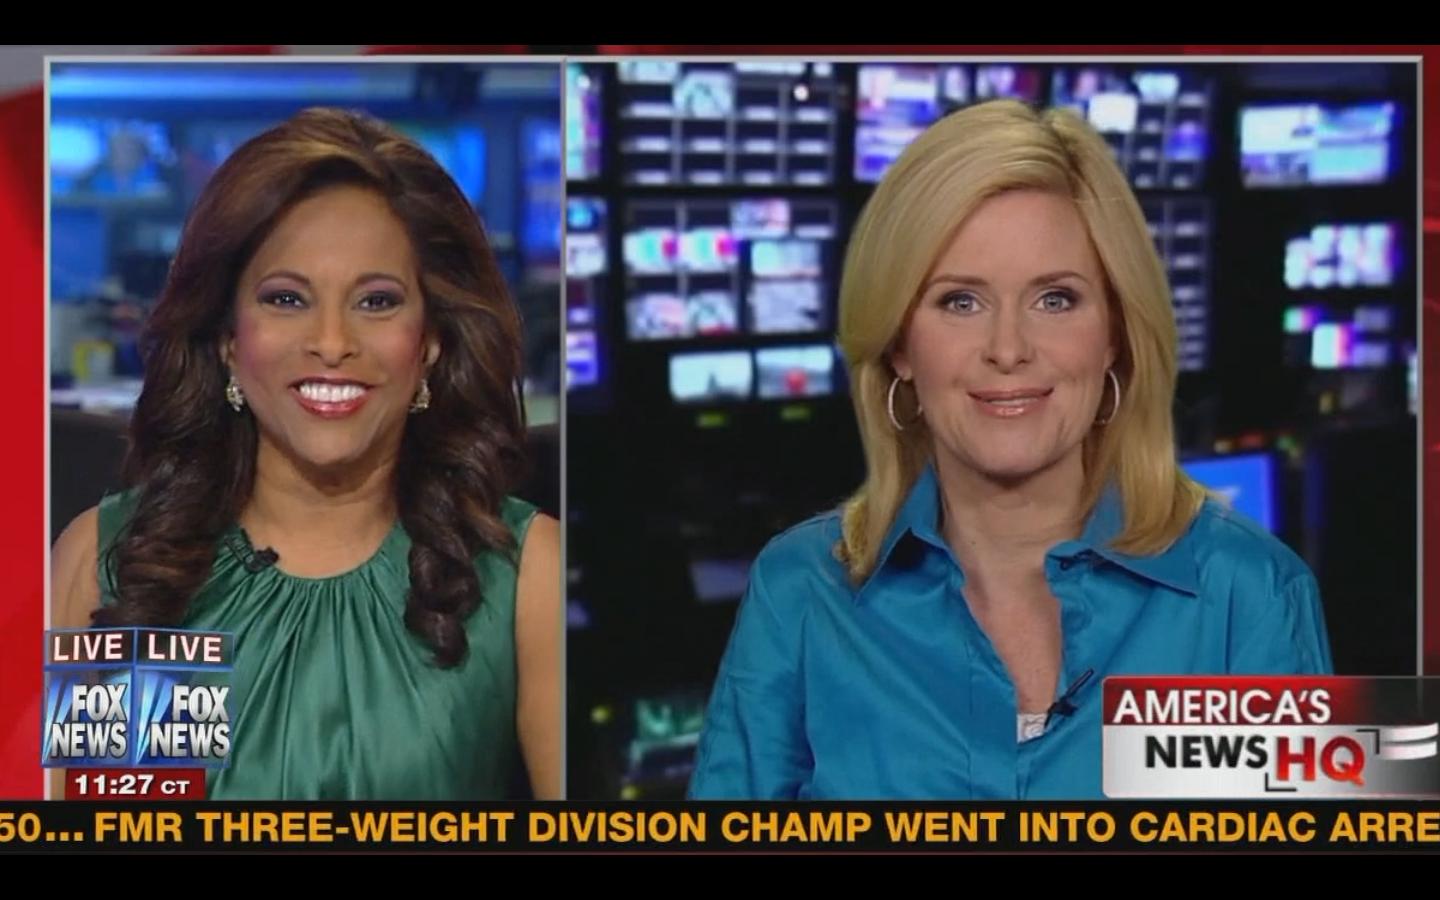 Ladies in Satin Blouses: unknown fox news anchor in light blue silk blouse1440 x 900